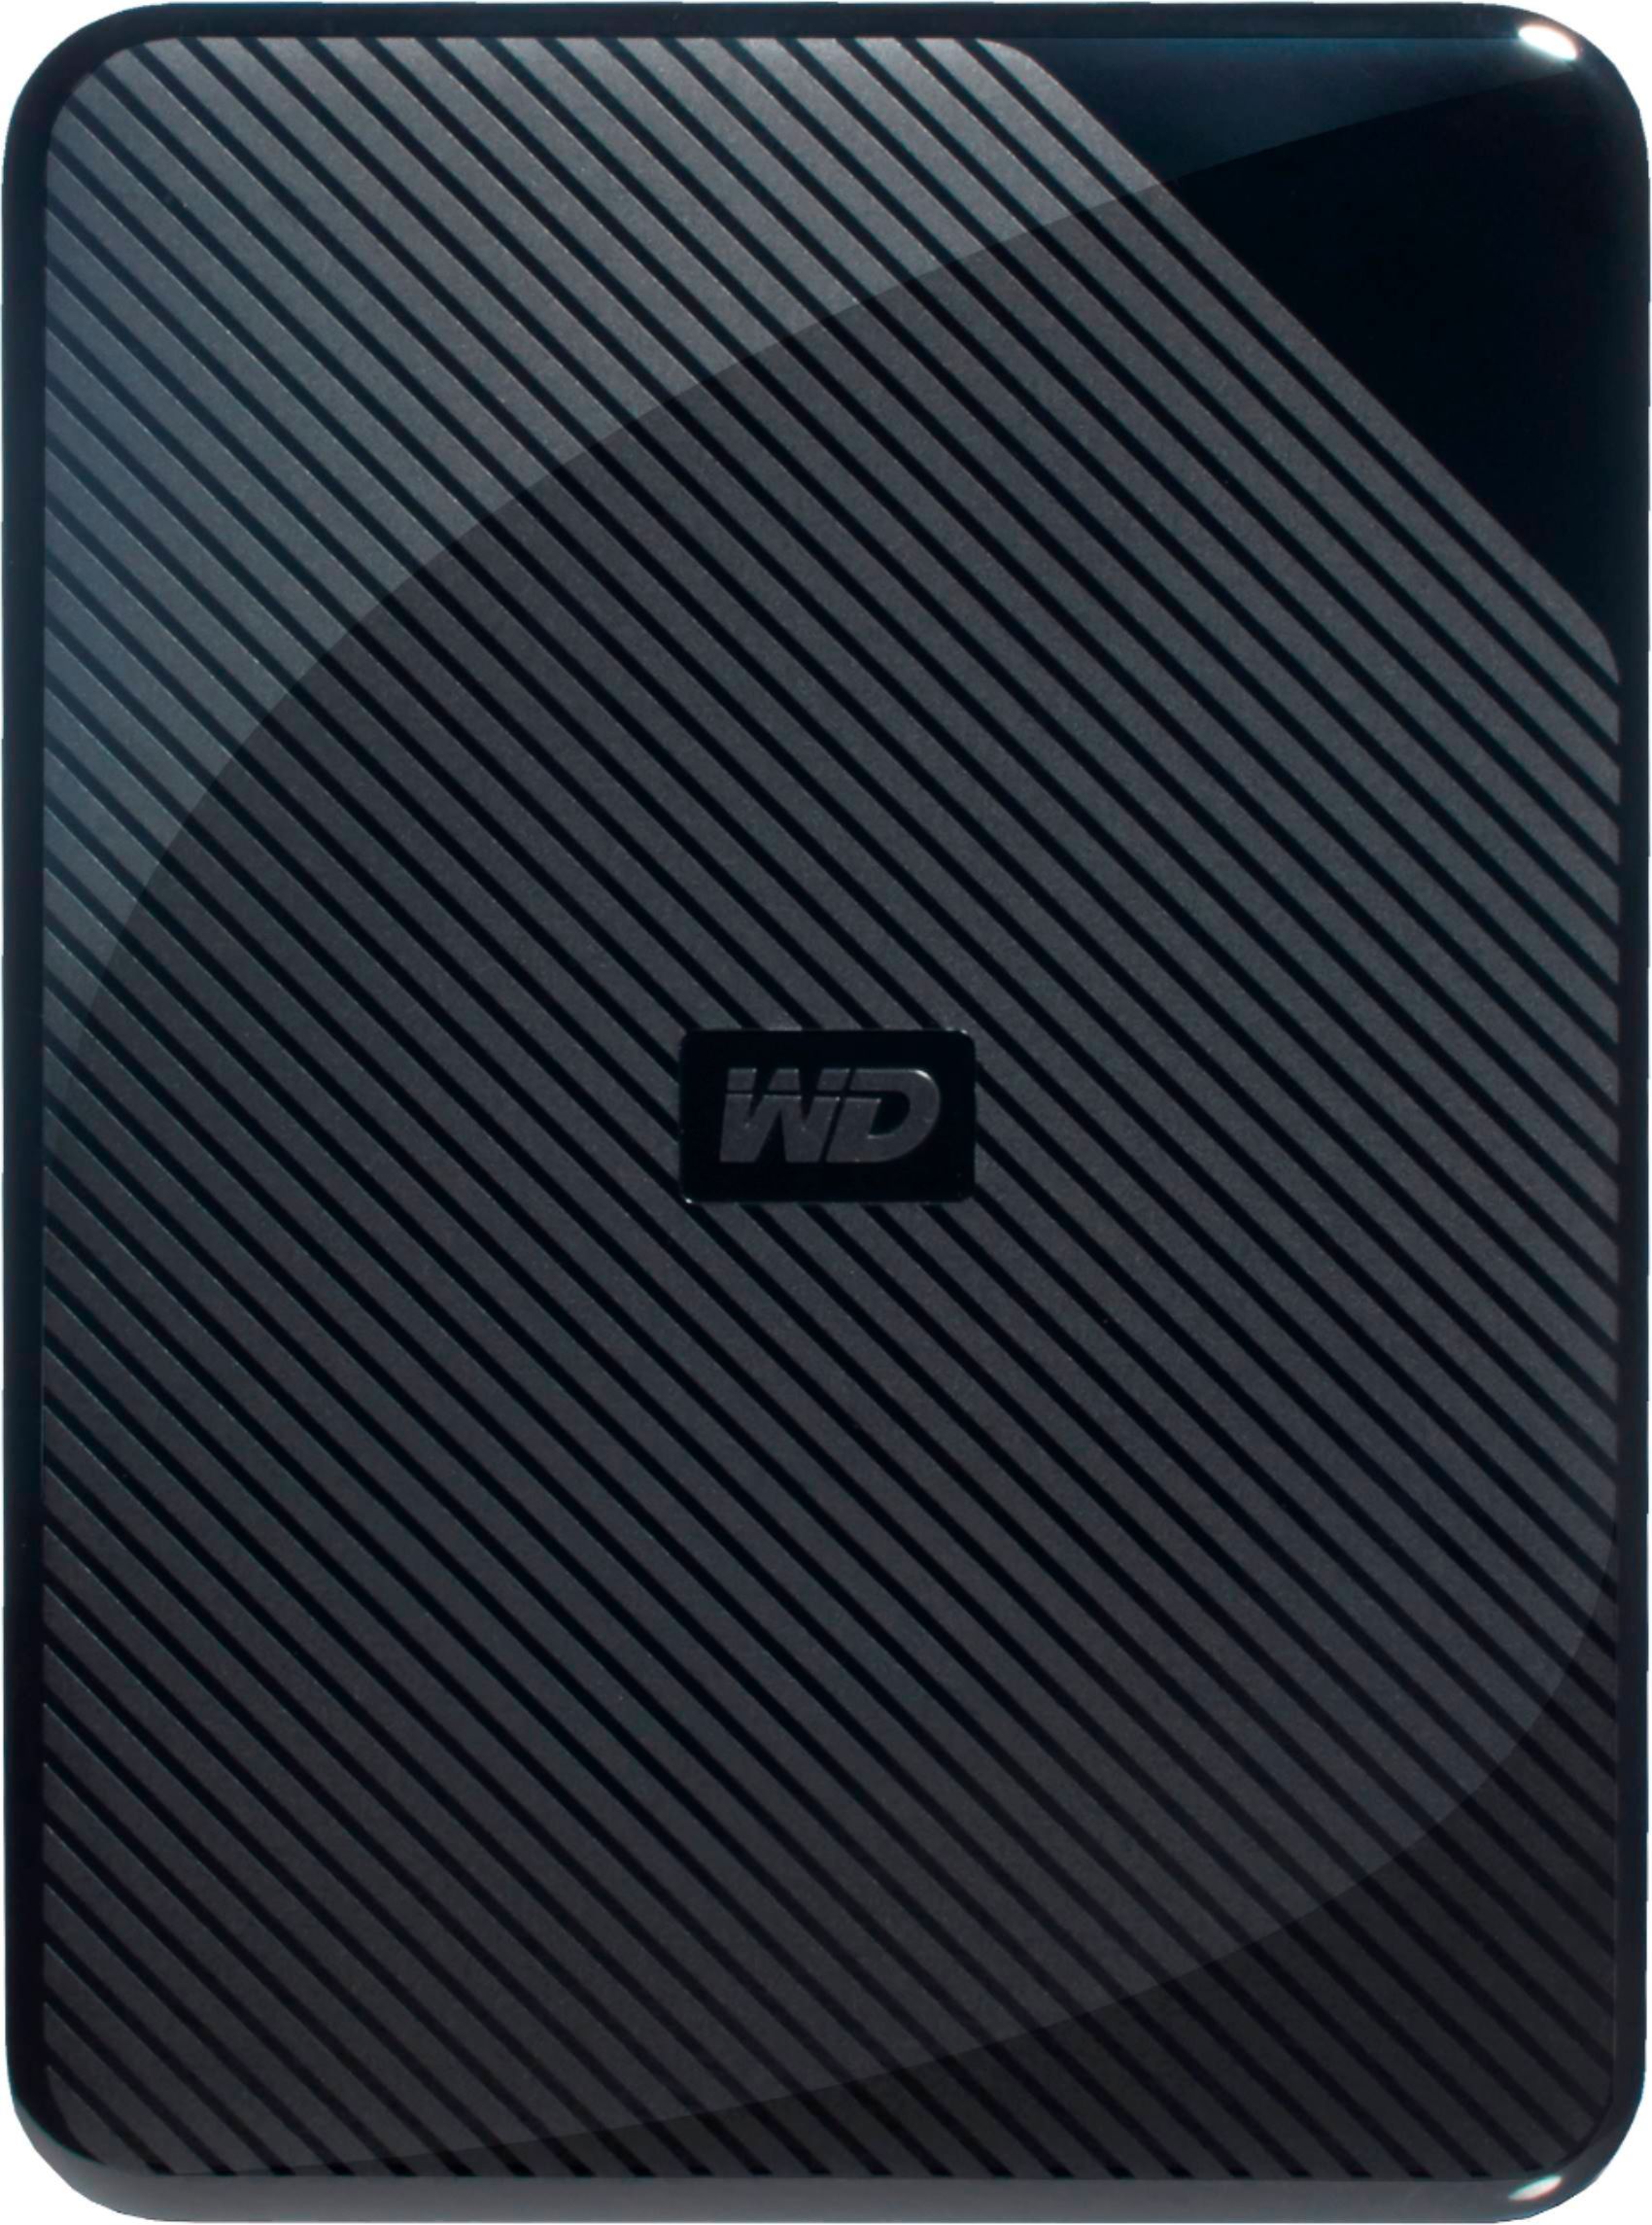 wd 2tb gaming drive works with playstation 4